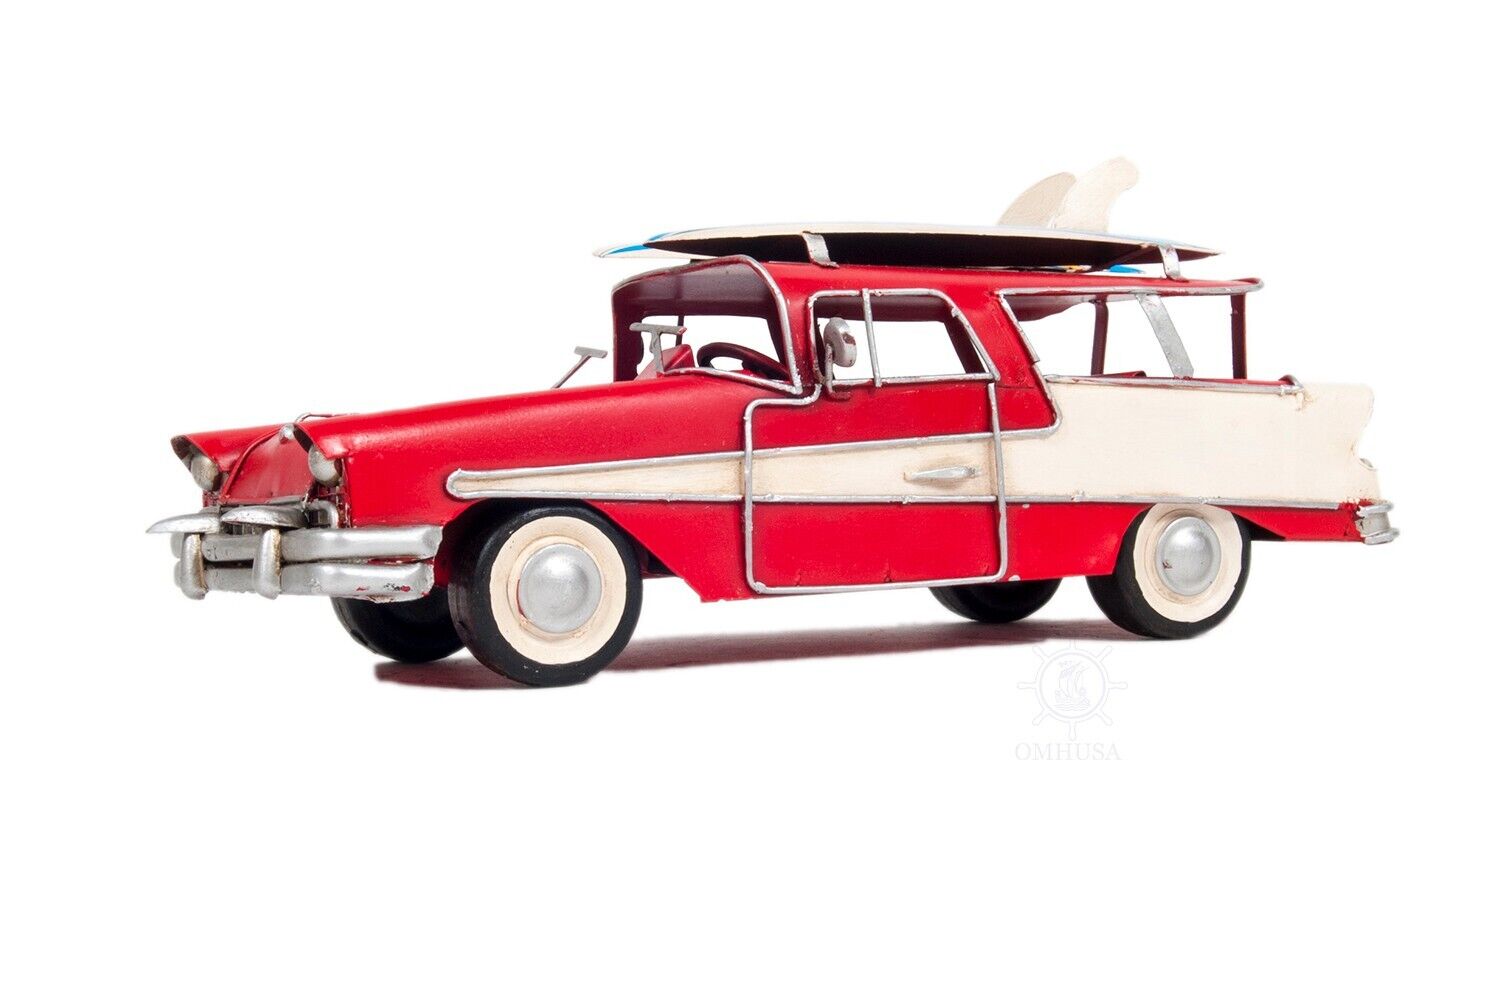 1957 Ford Country Squire Station Wagon Red Car Model W/ Iron Frame & Metal Wheel